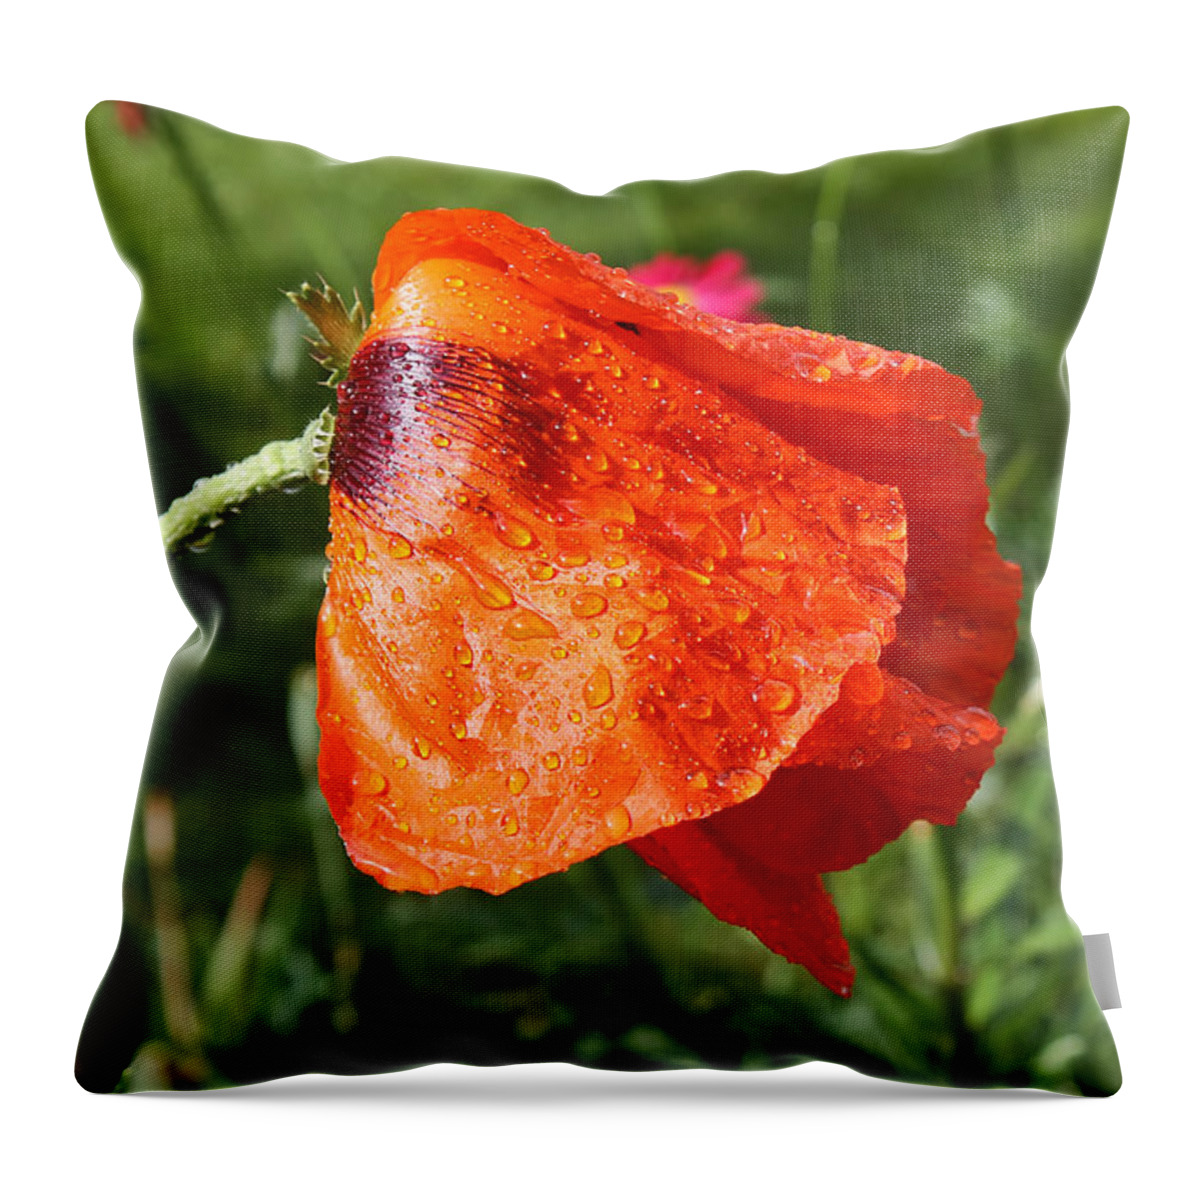 Flower Throw Pillow featuring the photograph Red Poppy II by Teresa Zieba